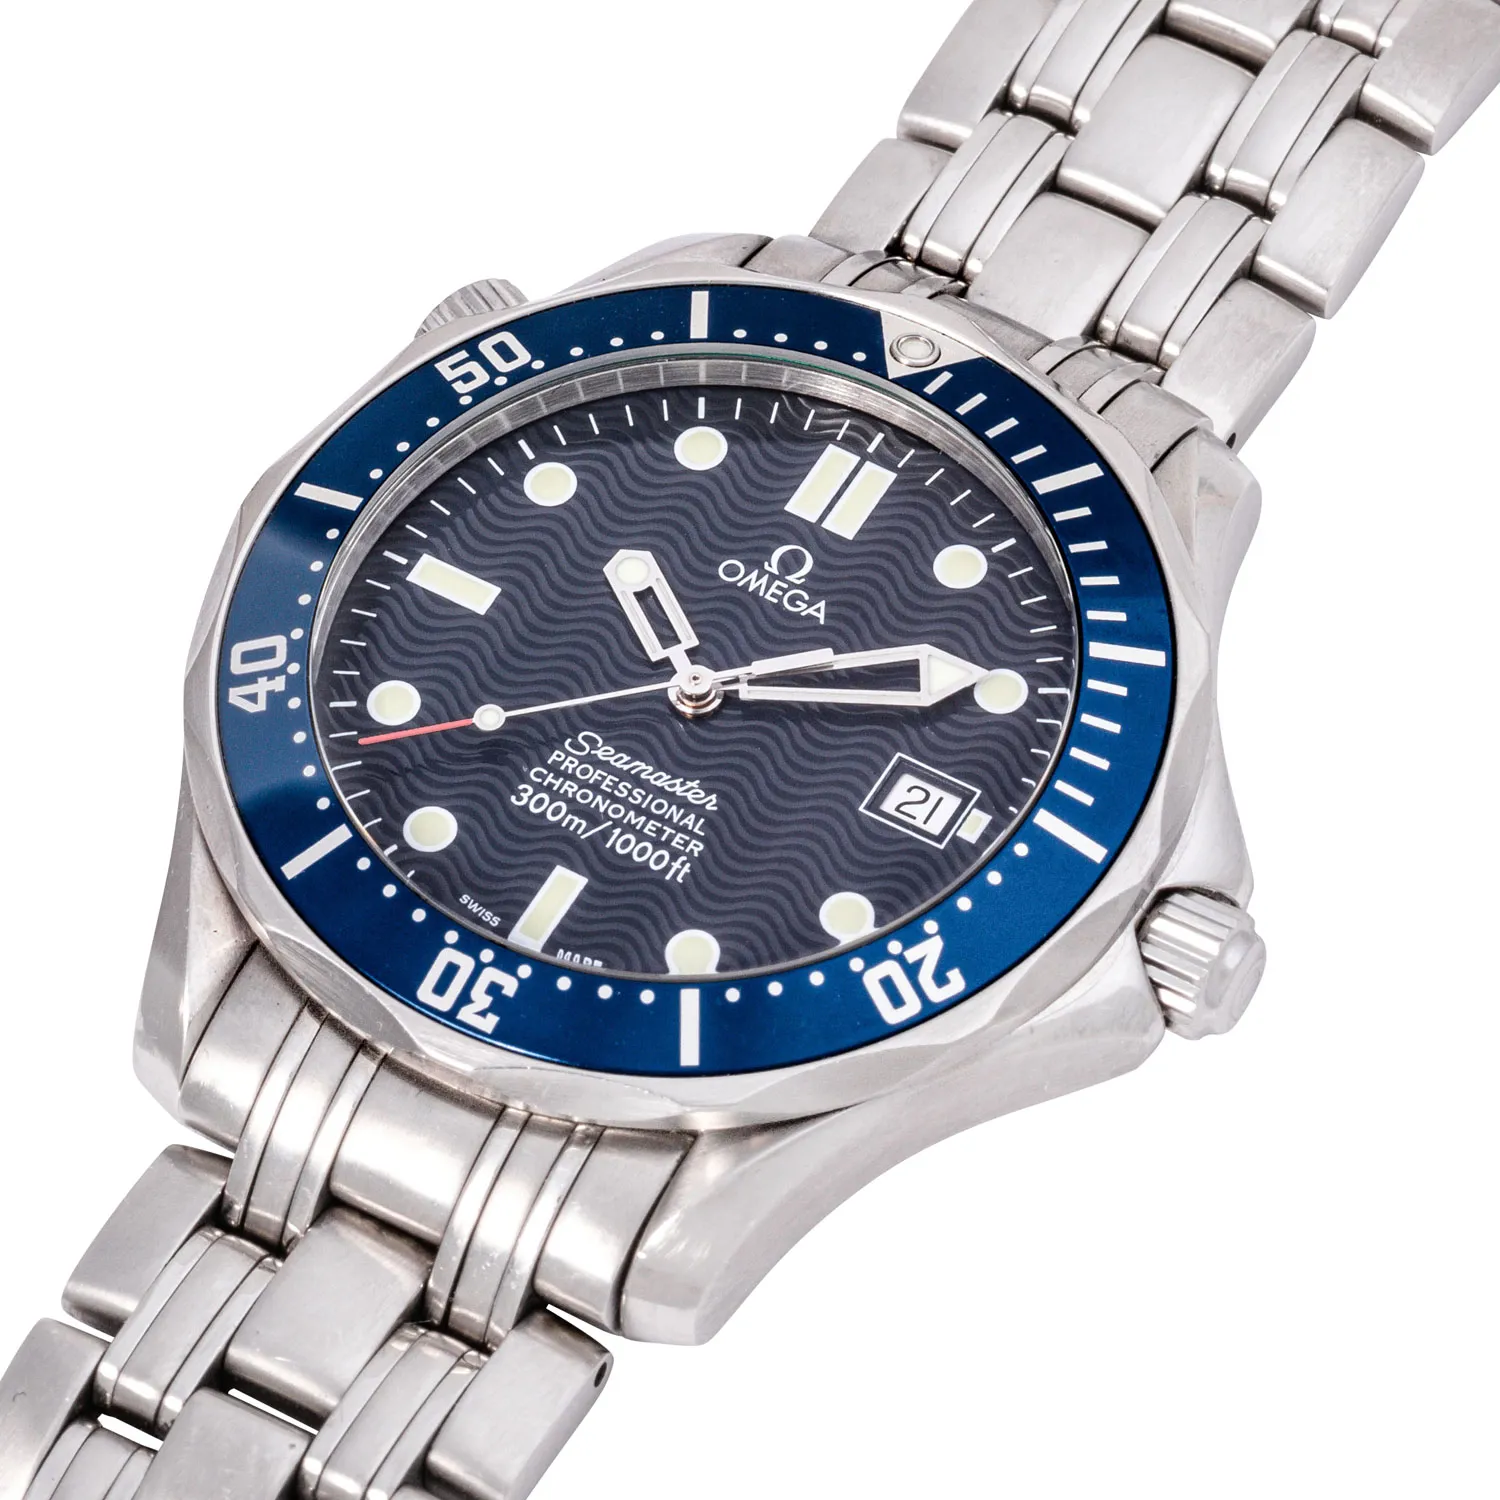 Omega Seamaster Diver 300M 25318000 41mm Stainless steel Blue 5